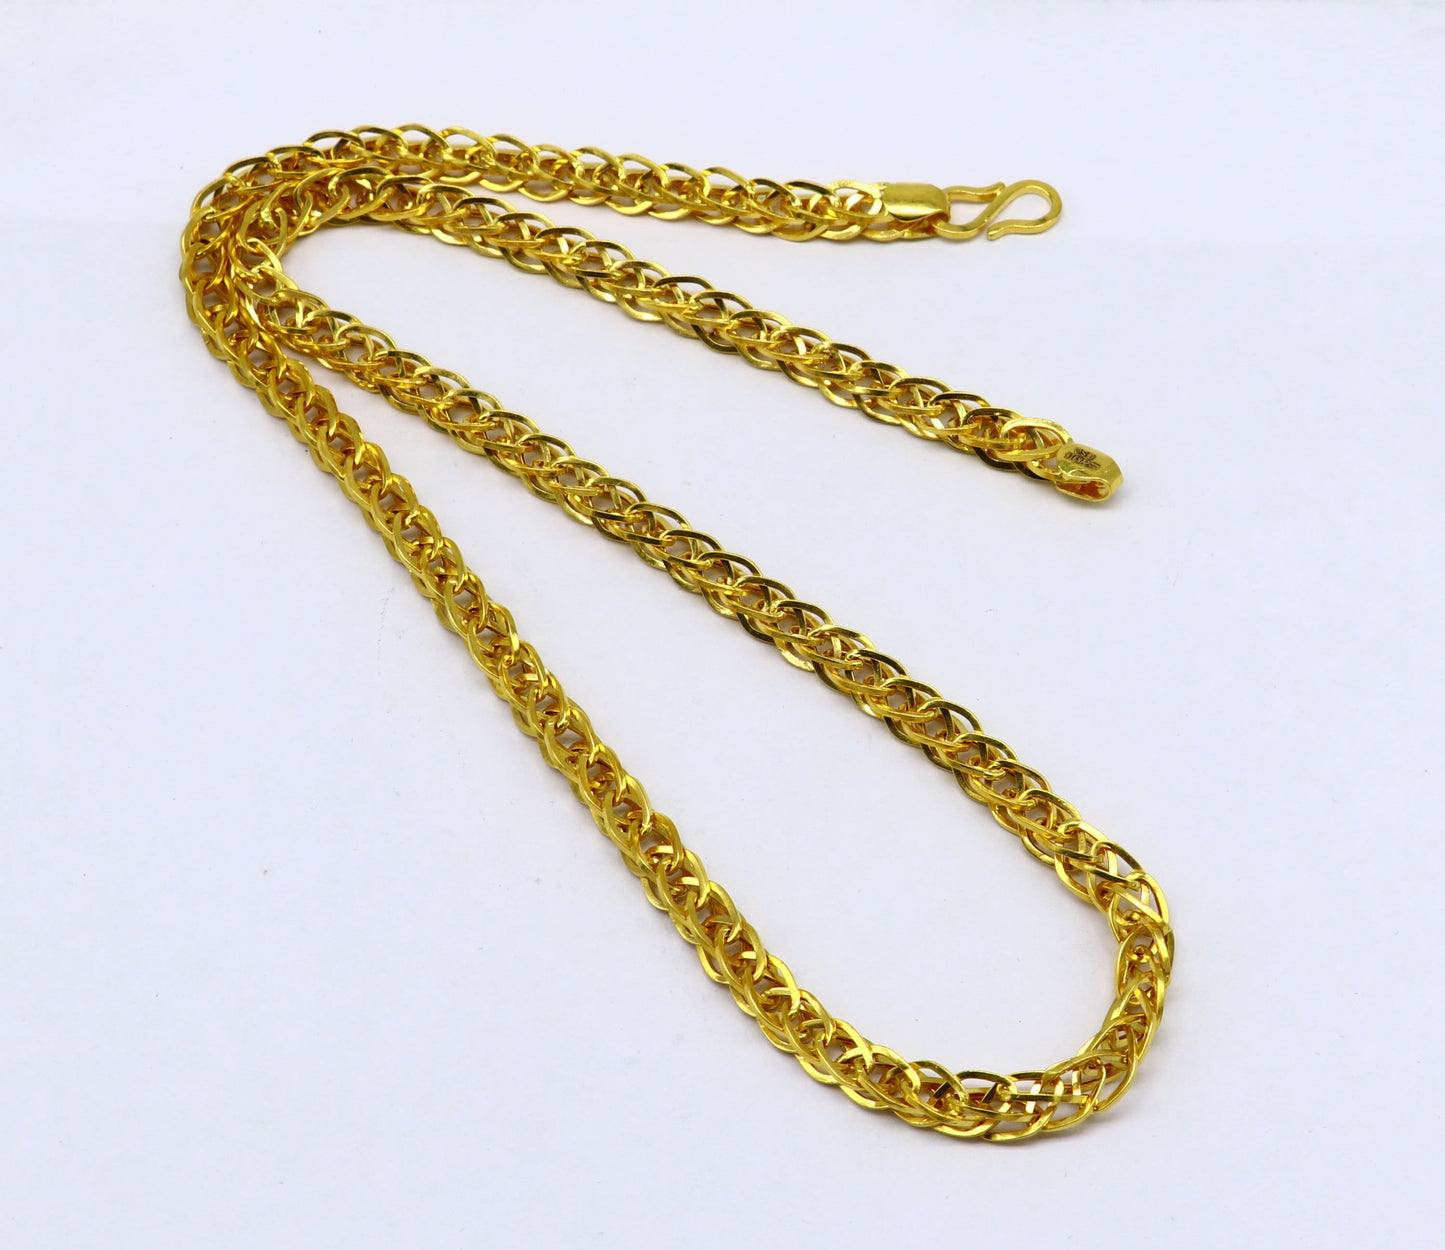 22karat yellow gold handmade unique design all sizes chain necklace amazing men's gifting wedding jewelry ch575 - TRIBAL ORNAMENTS